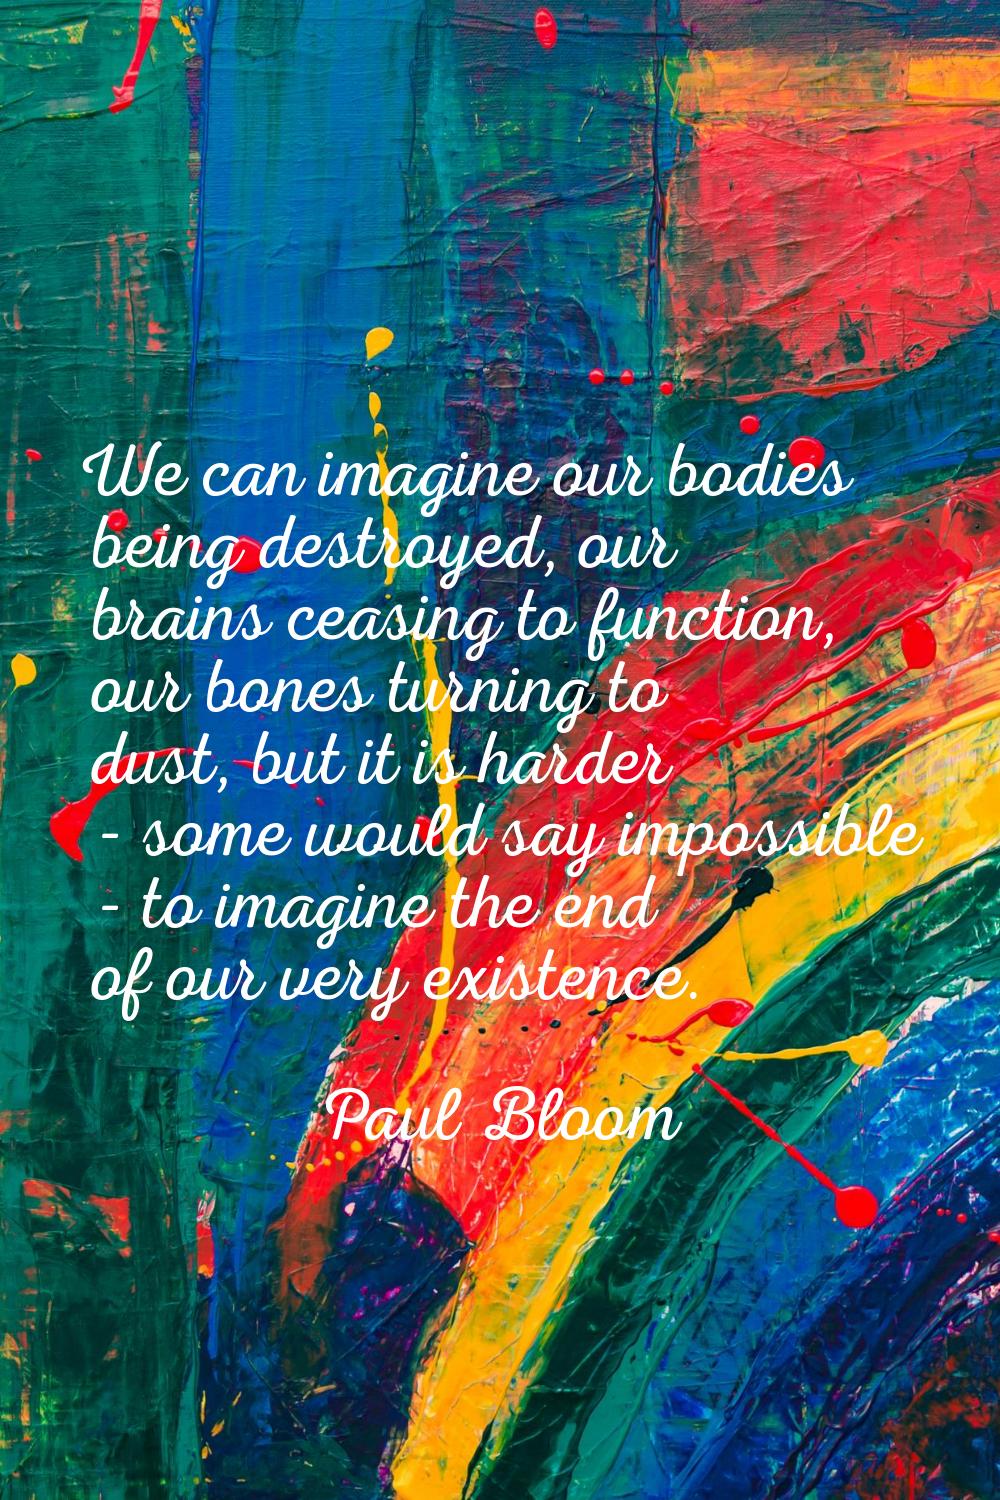 We can imagine our bodies being destroyed, our brains ceasing to function, our bones turning to dus